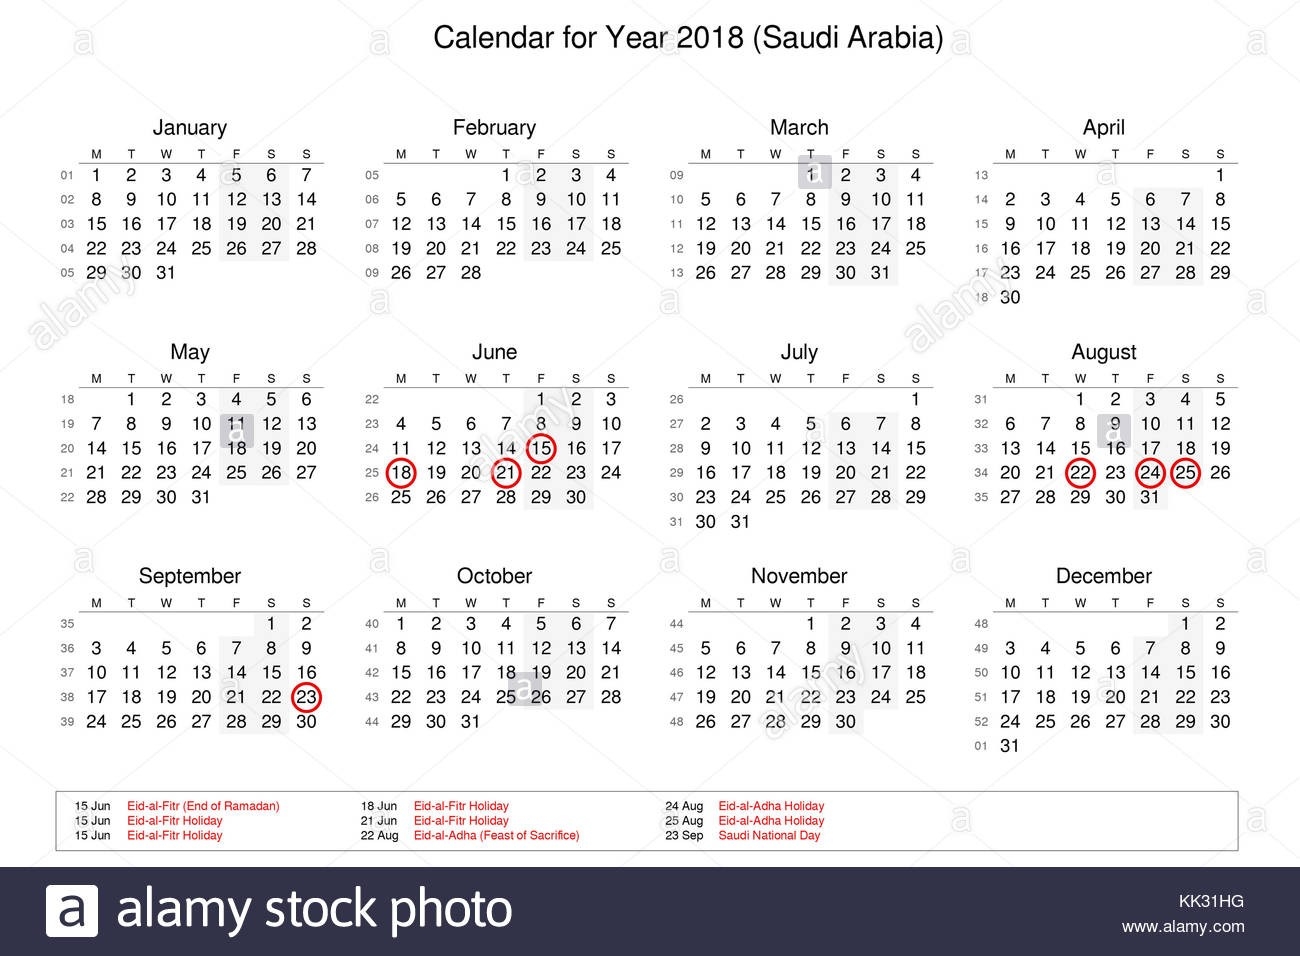 Calendar Of Year 2018 With Public Holidays And Bank Holidays-Saudi Bank Holidays 2020